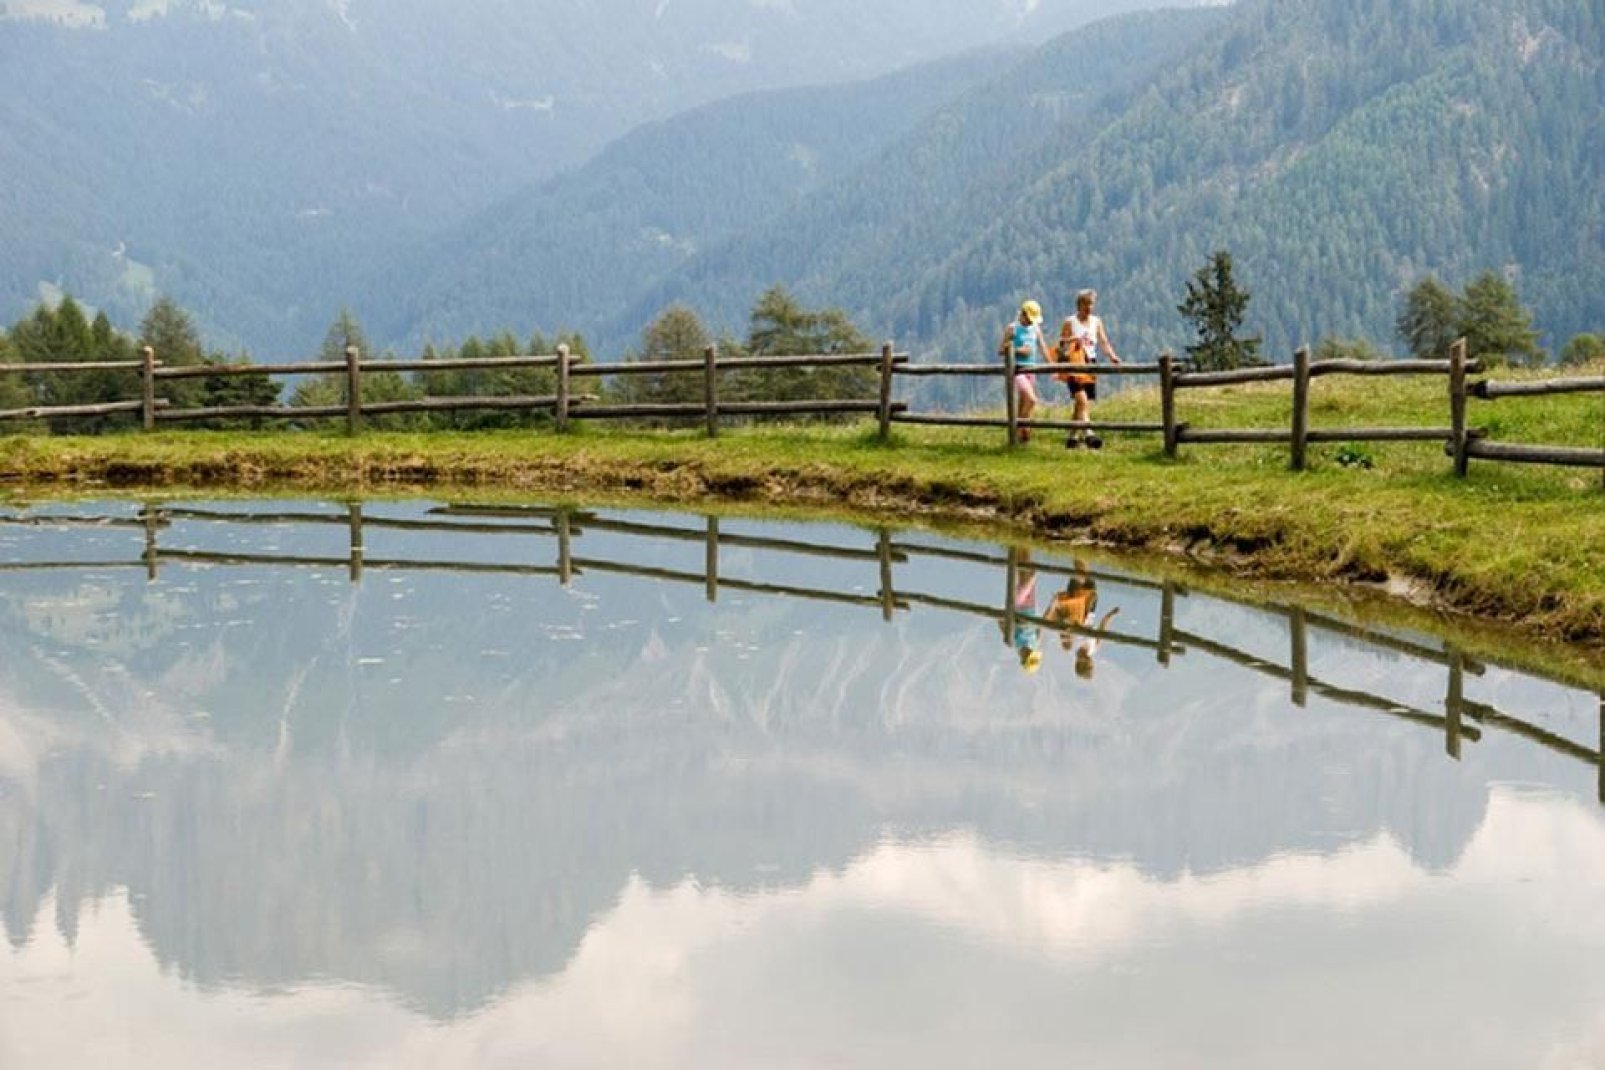 The territory of Bolzano, of great natural value, is perfect for hiking and walks.